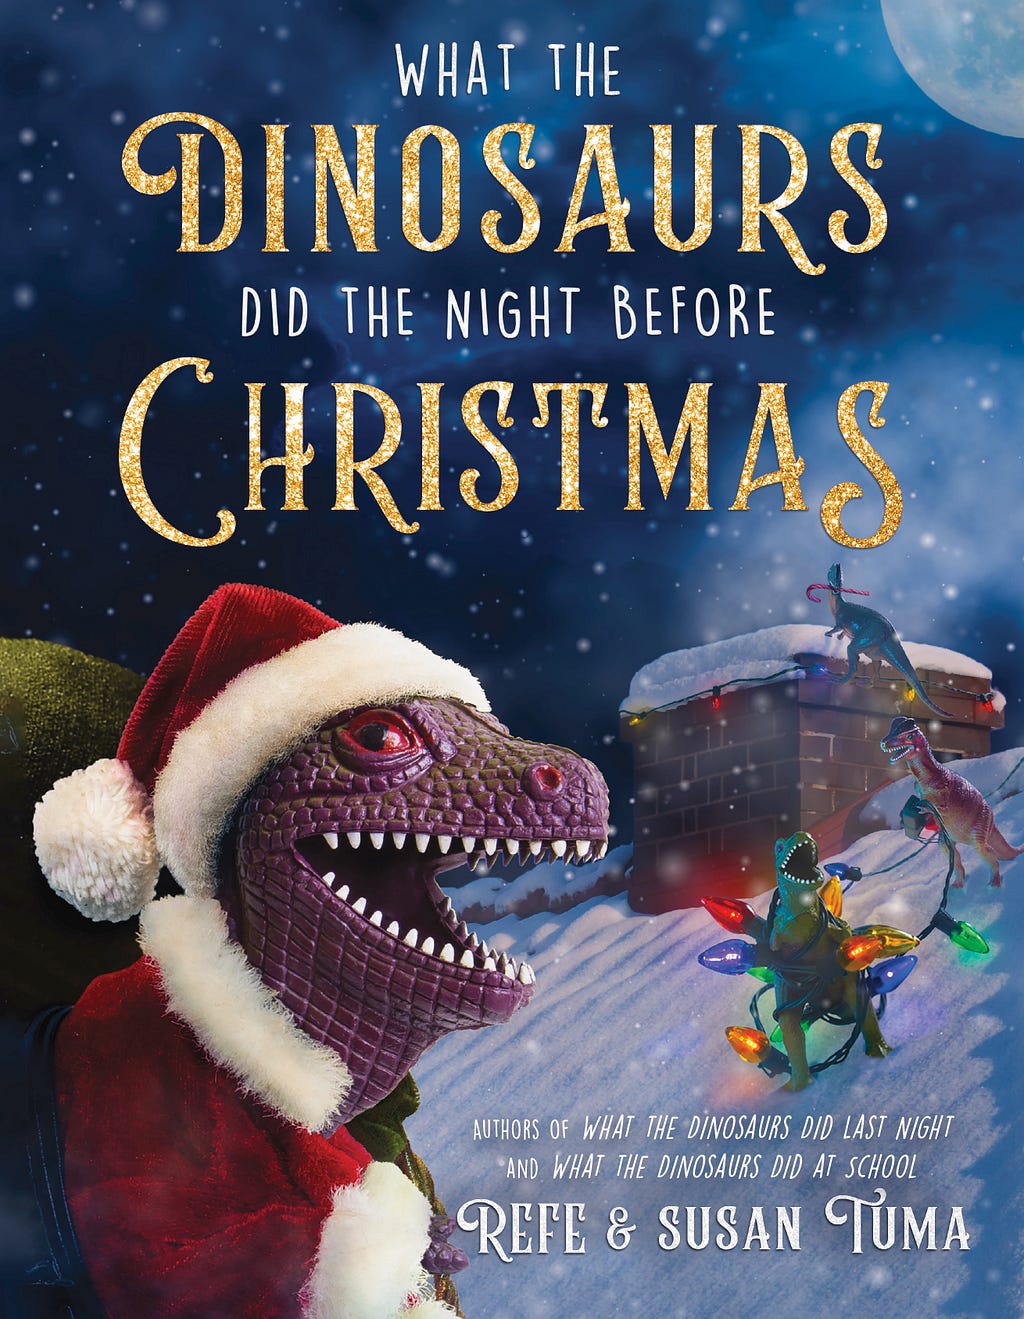 The cover of our new picture book WHAT THE DINOSAURS DID THE NIGHT BEFORE CHRISTMAS, featuring a purple plastic dinosaur wearing a Santa costume on a snowy rooftop.